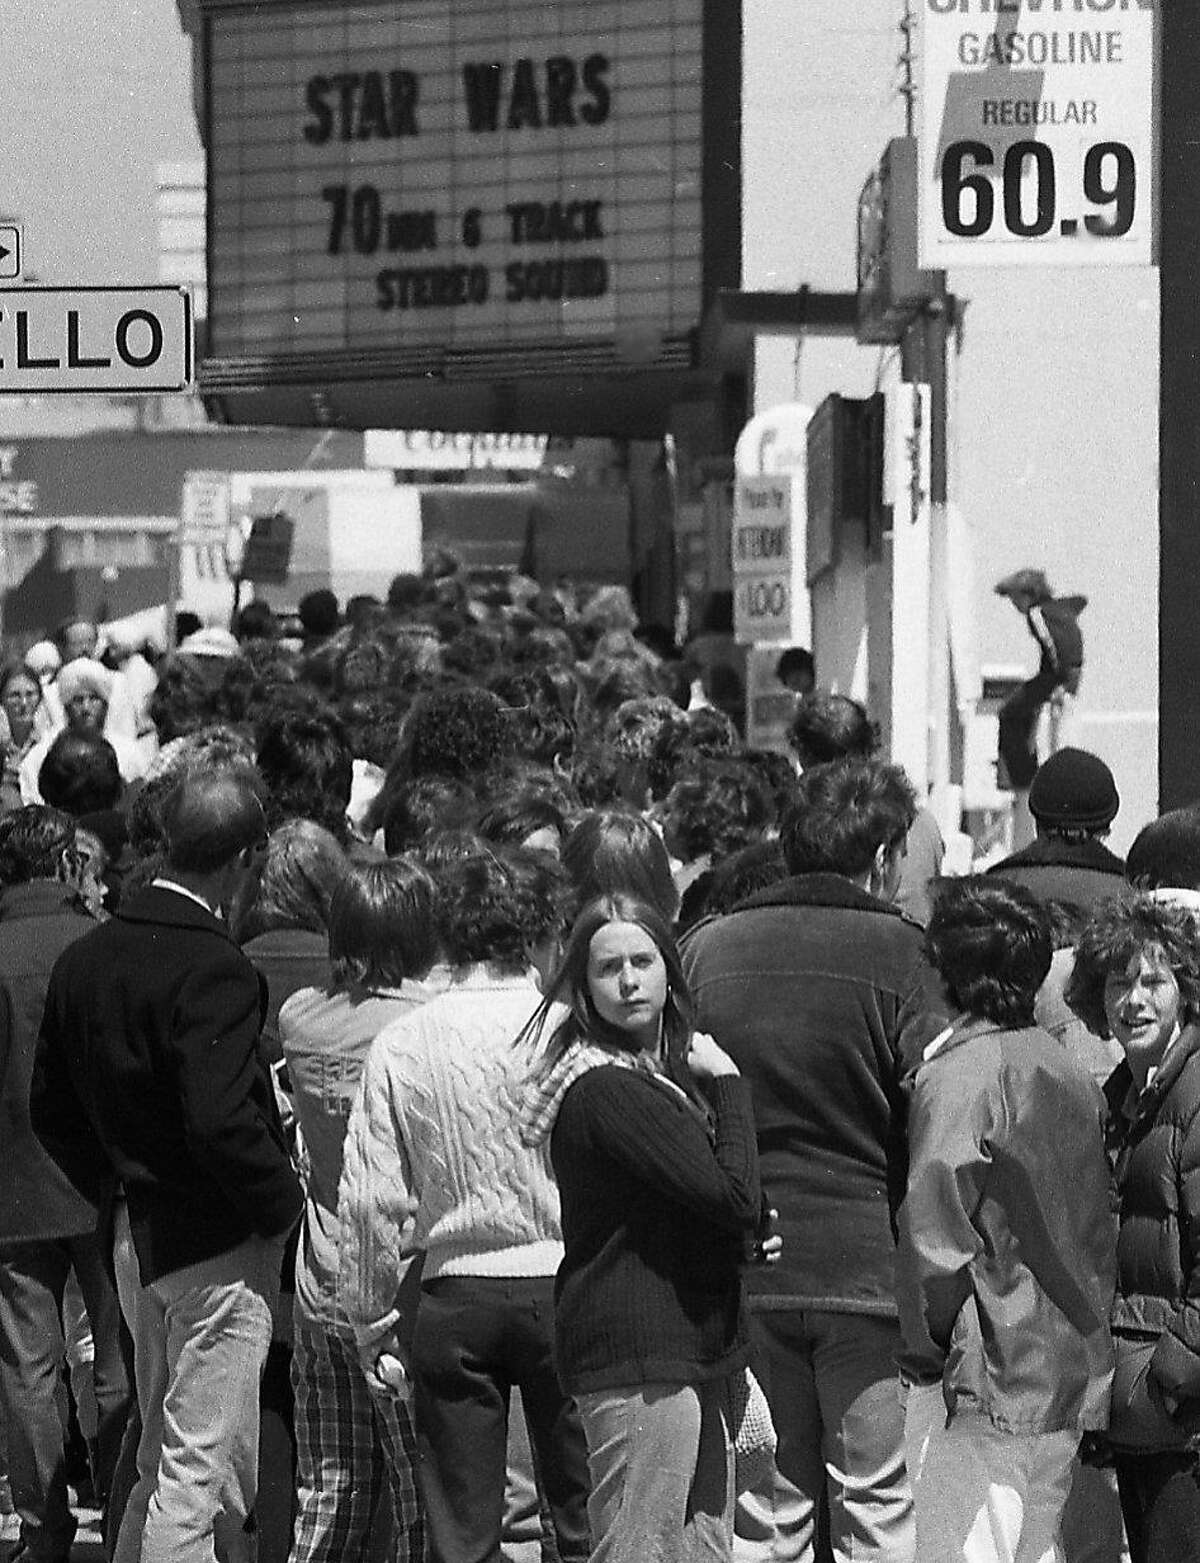 May 25, 1977: Fans line up during opening weekend to see "Star Wars" at the Coronet Theatre in San Francisco. The Geary Boulevard movie house seated close to 2,000 and became a Mecca for the "Star Wars" films, before it was demolished in 2007.